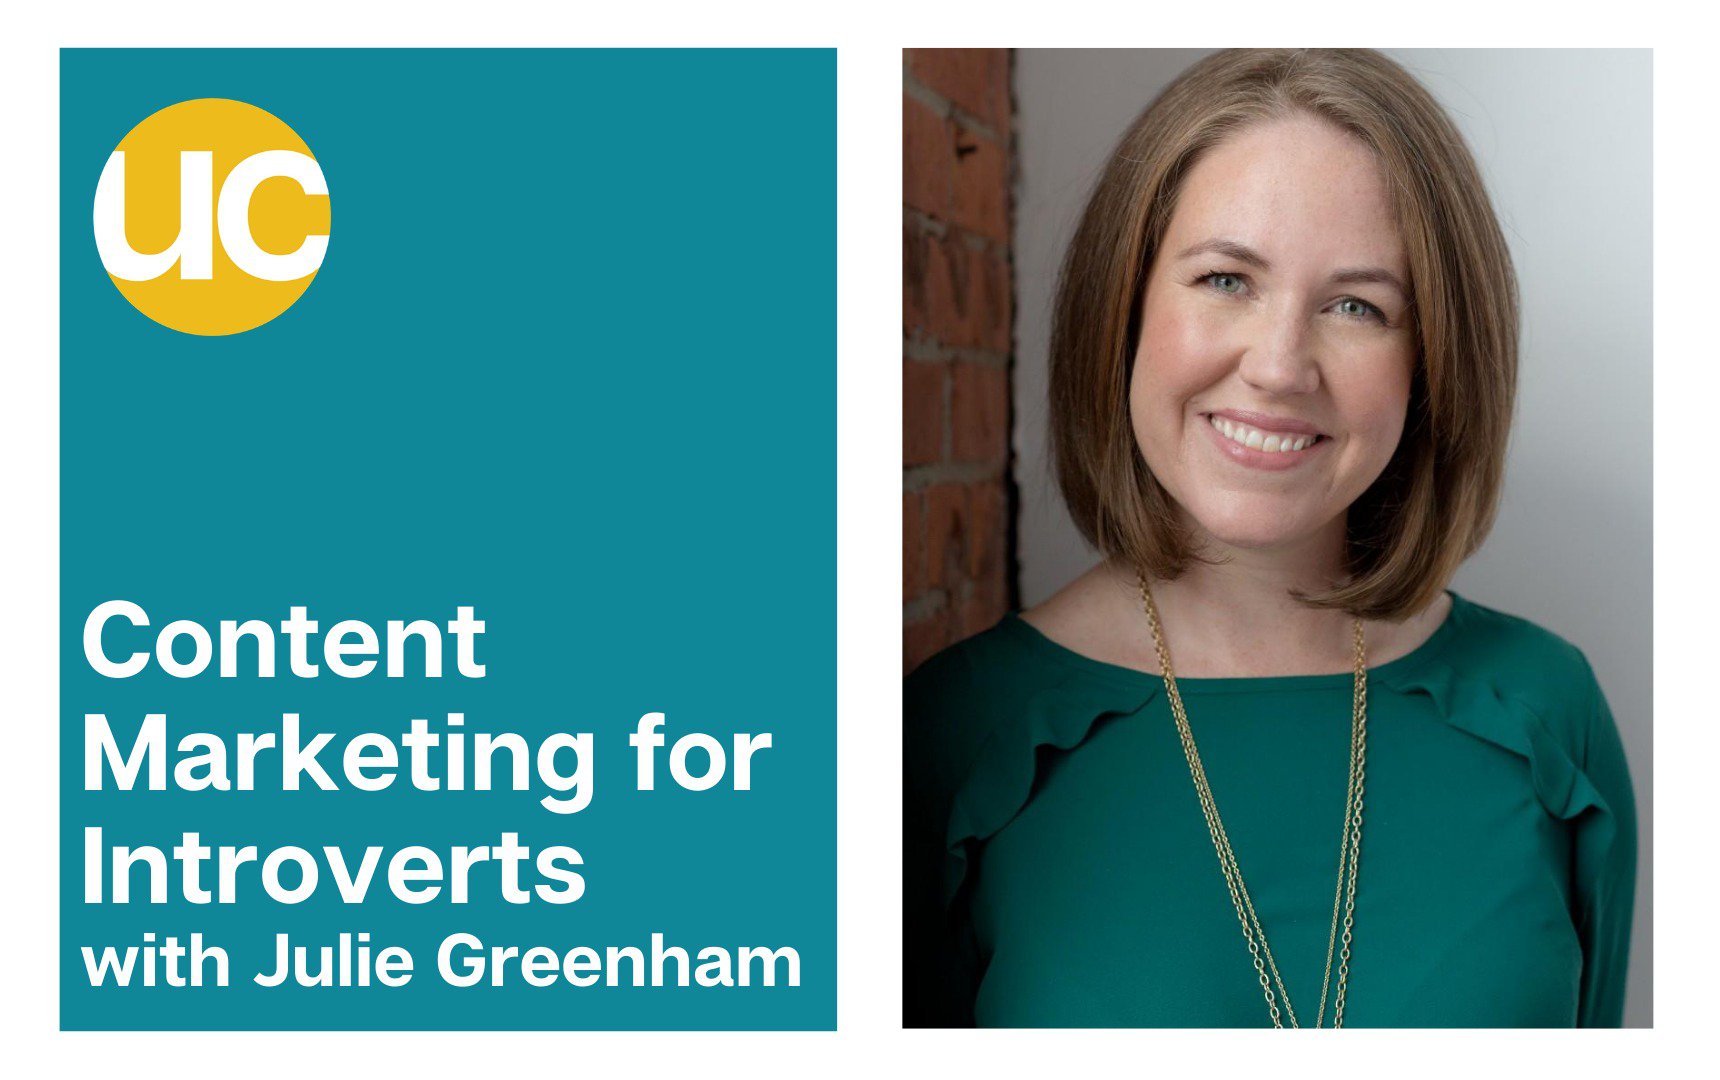 Content Marketing For Introverts with Julie Greenham